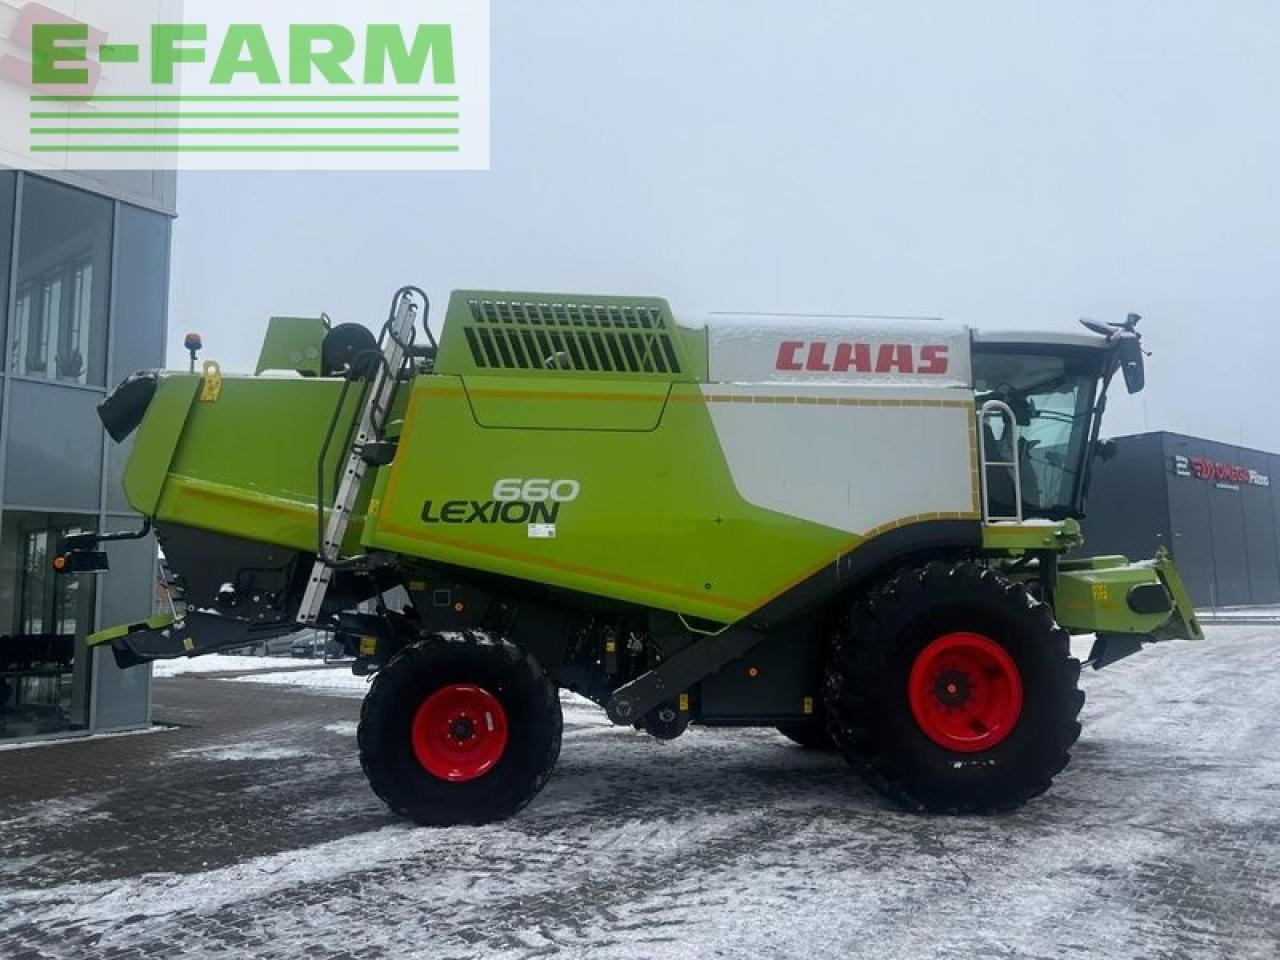 Combine harvester CLAAS lexion 660: picture 15